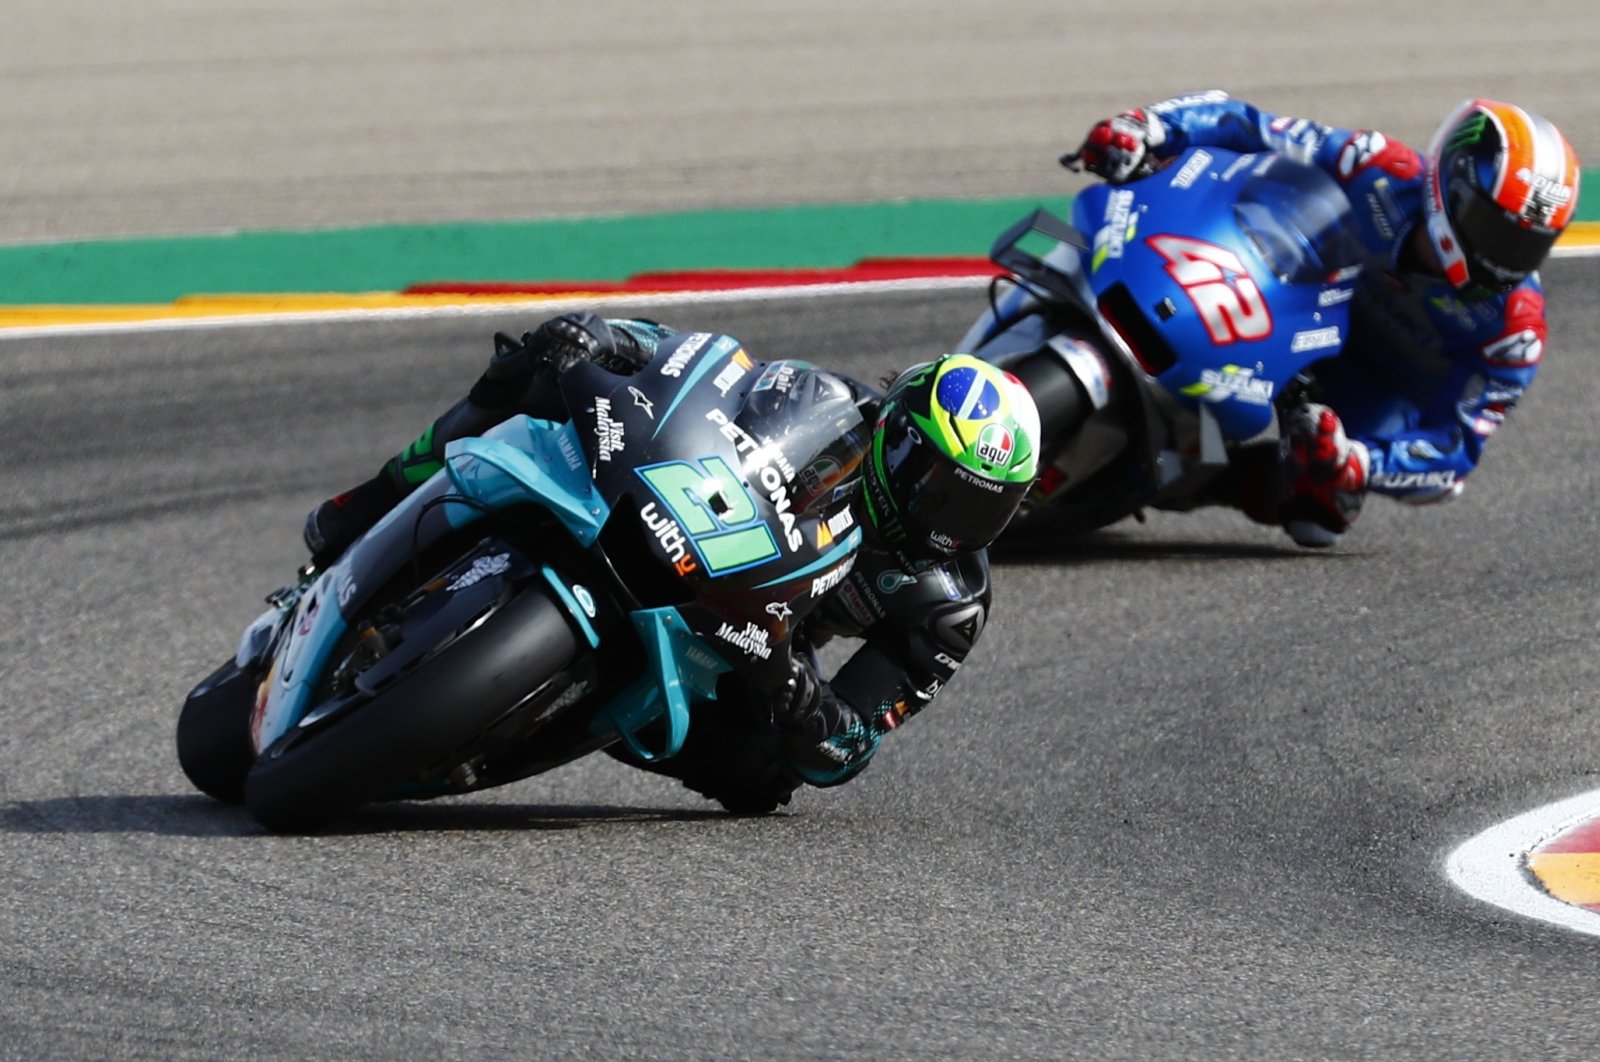 Franco Morbidelli (21) in action during the race, in Aragon, Spain, Oct. 25, 2020. (Reuters Photo)